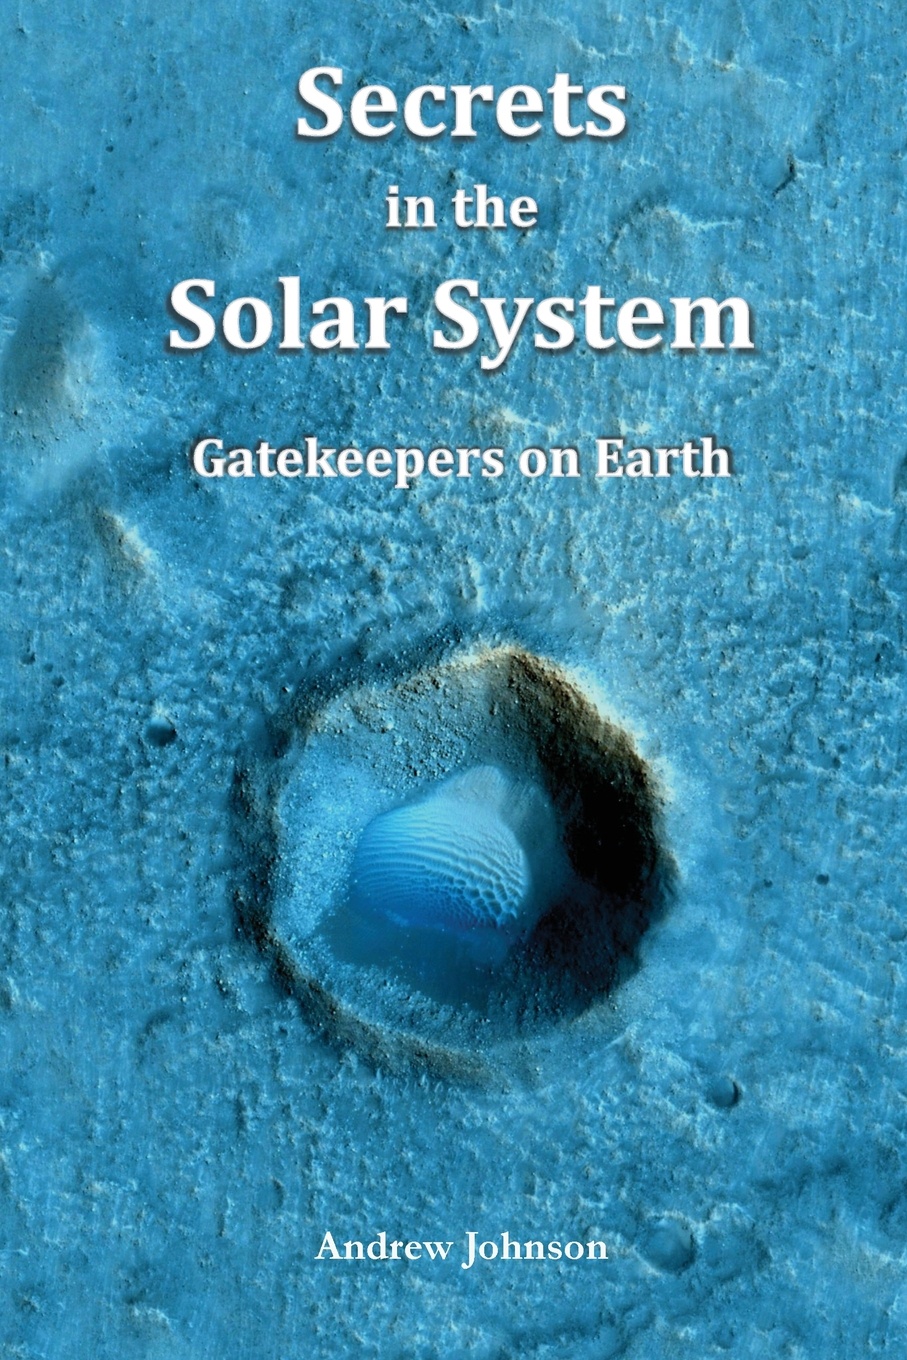 Secrets in the Solar System. Gatekeepers on Earth